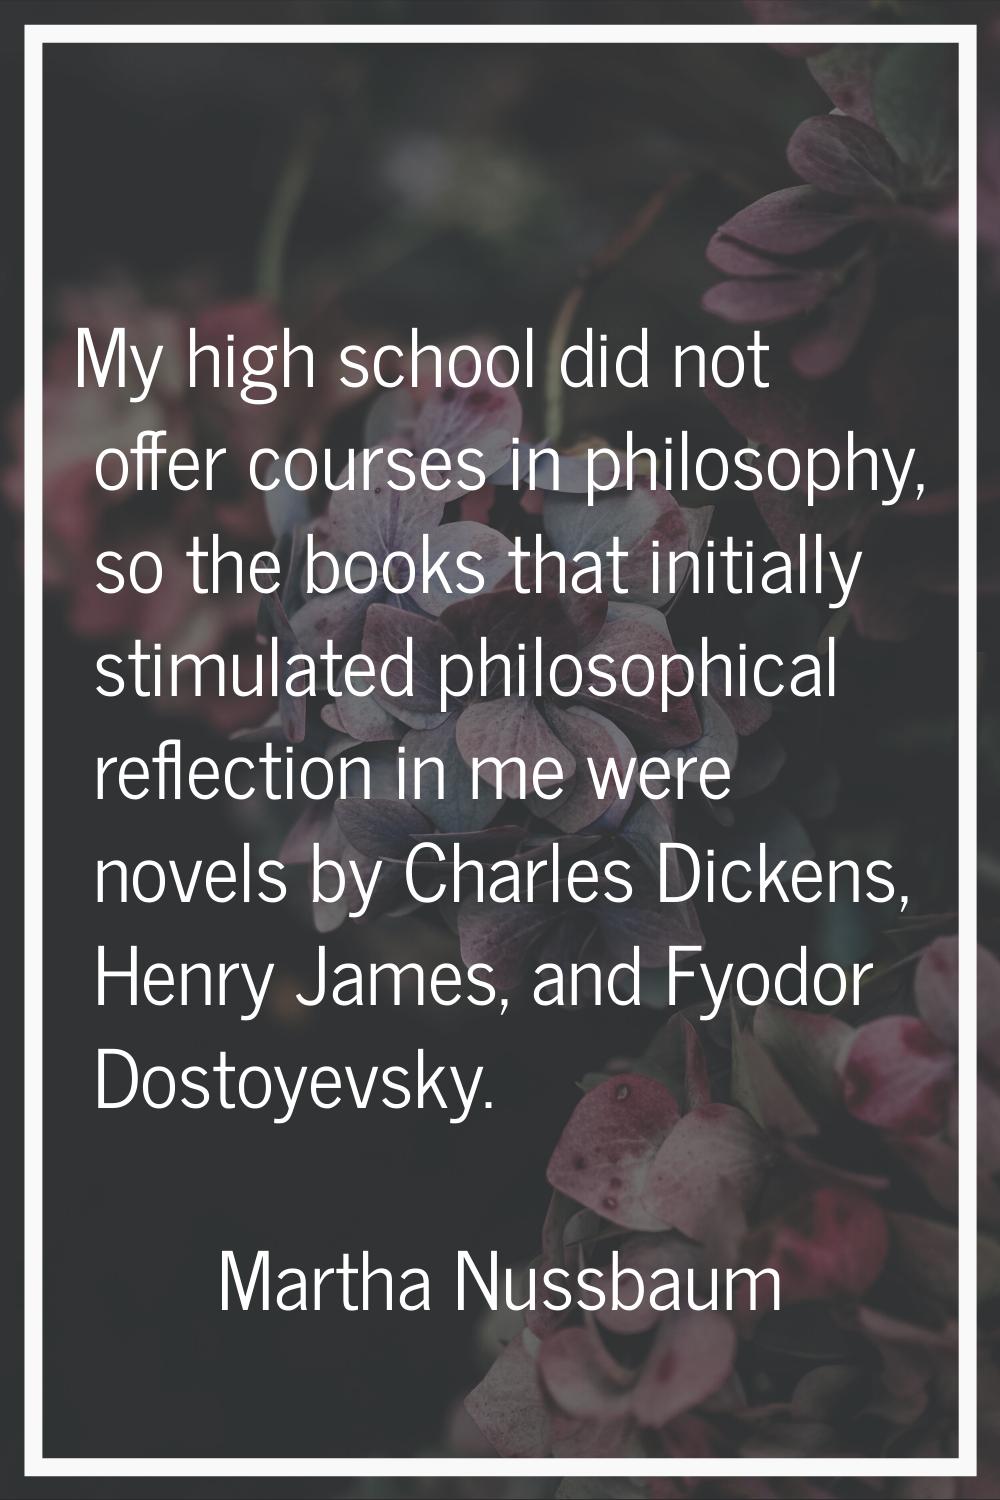 My high school did not offer courses in philosophy, so the books that initially stimulated philosop